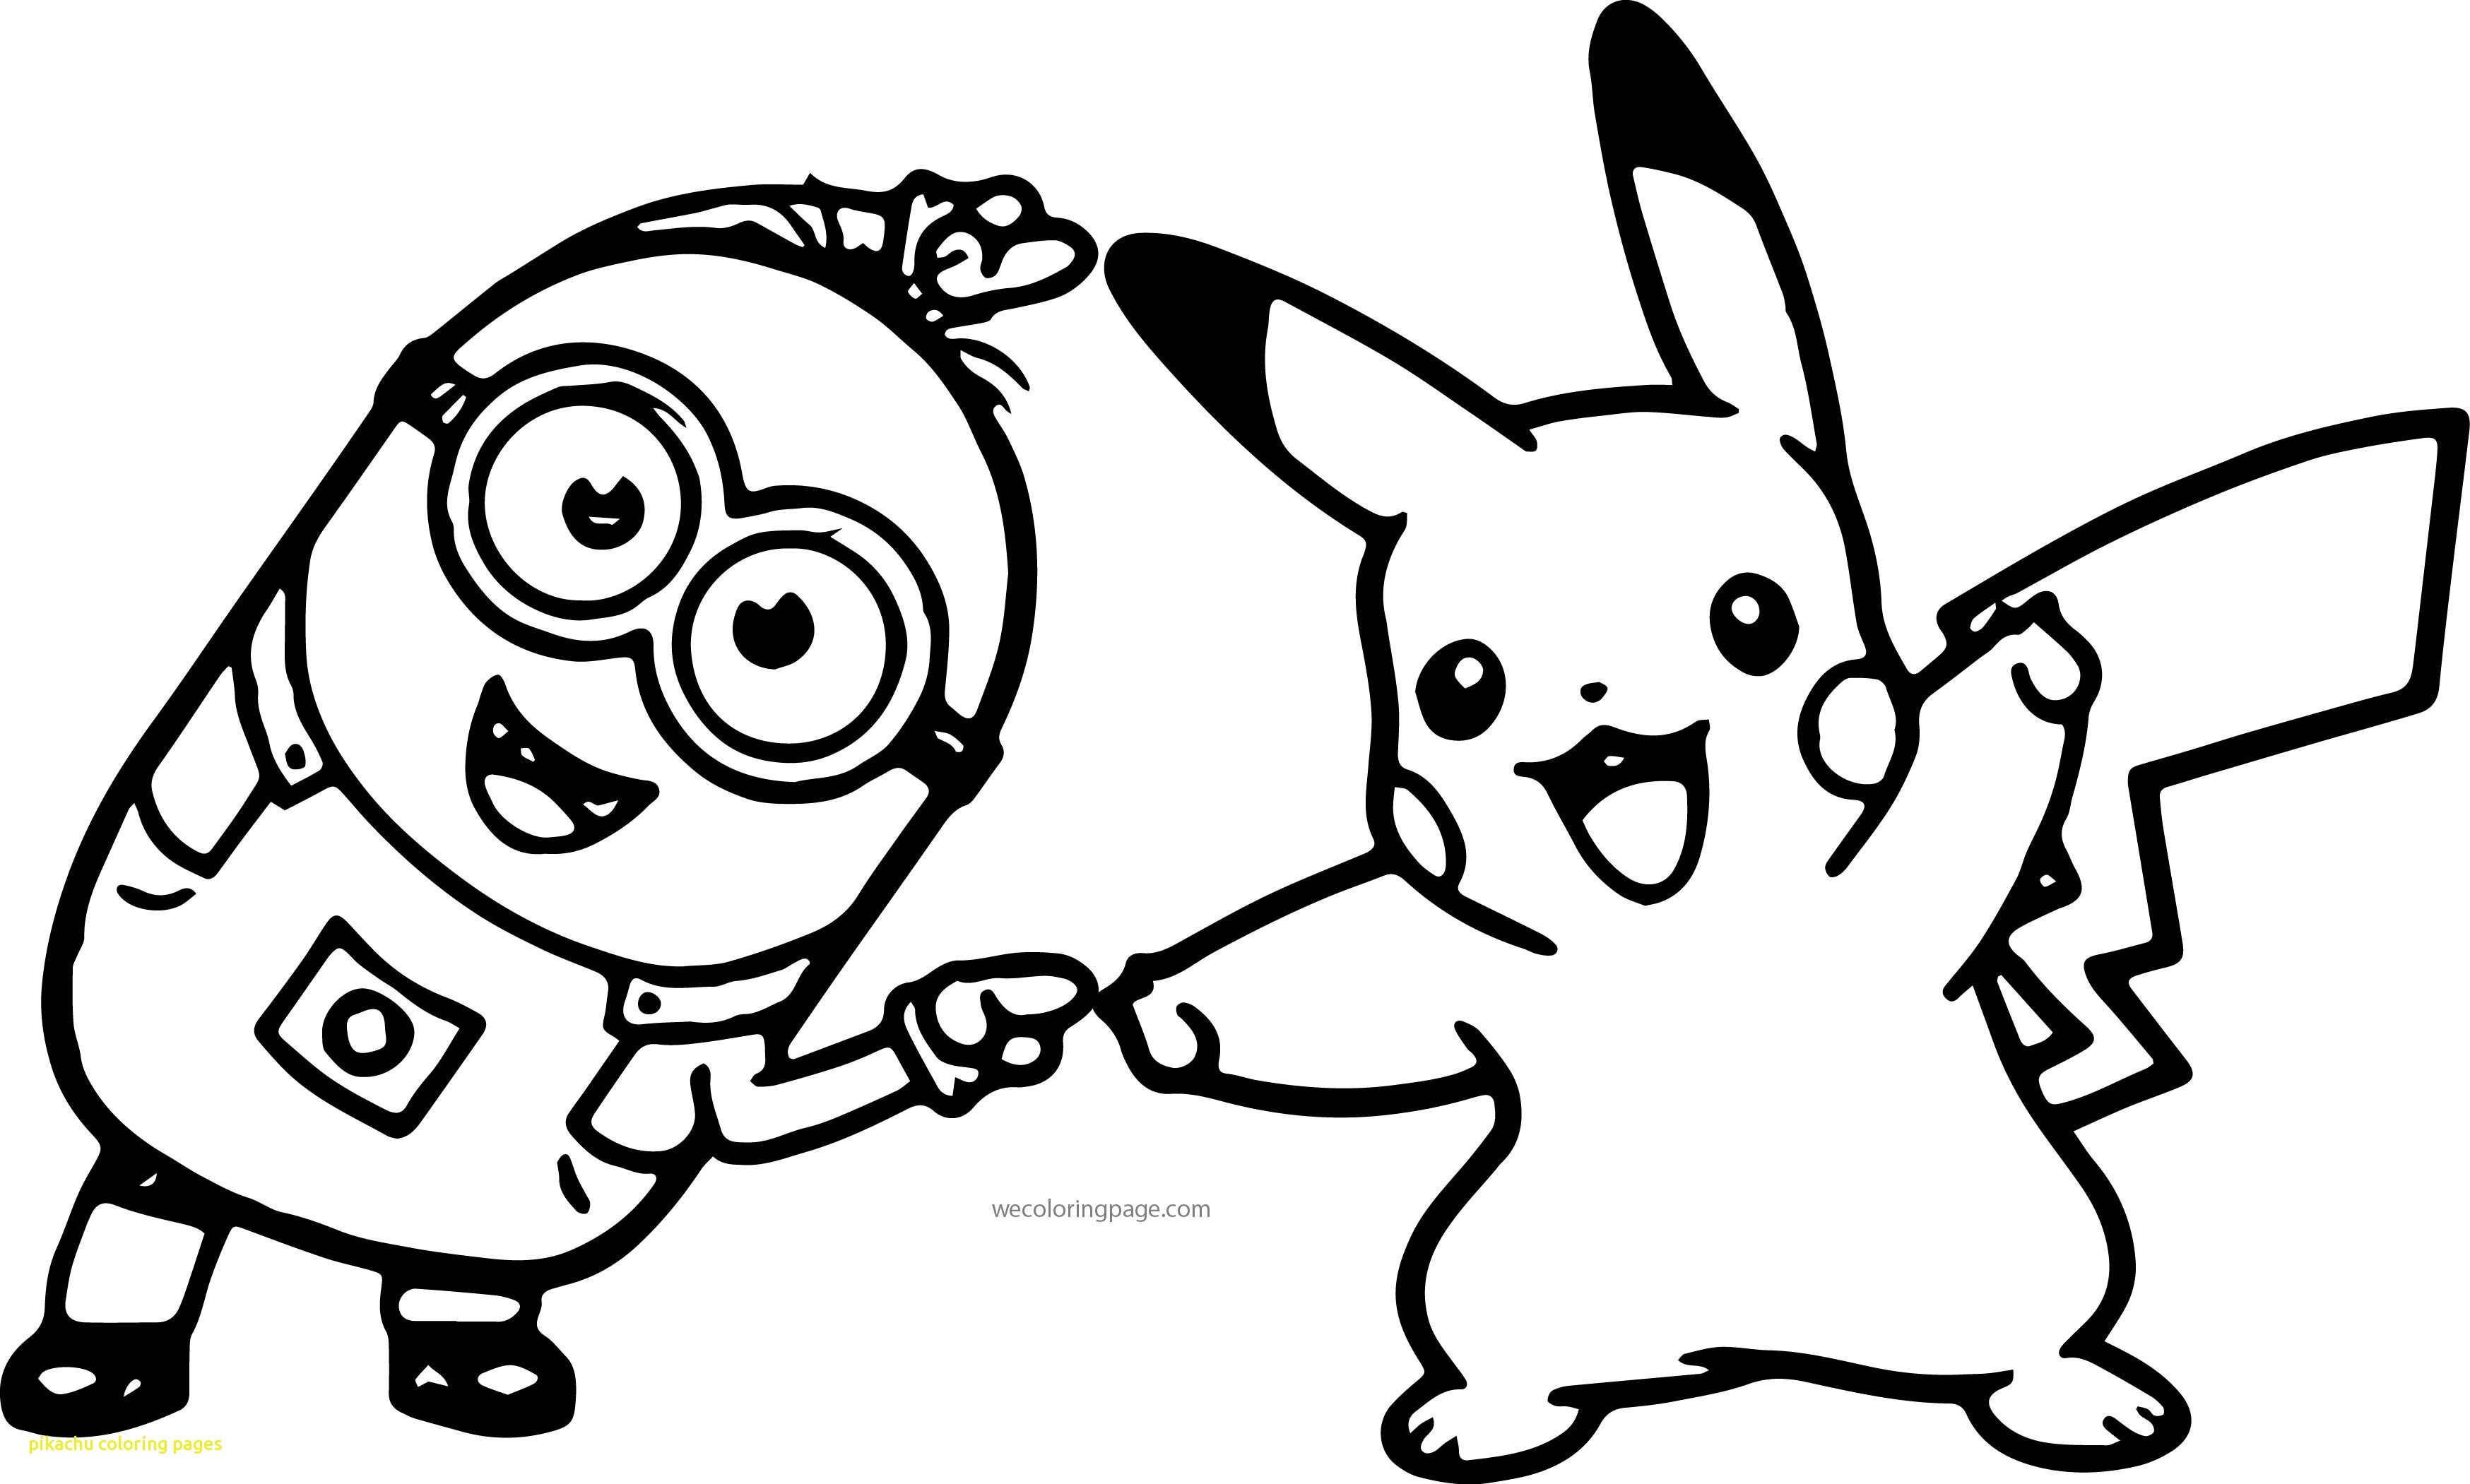 Minion and Pikachu Coloring Page Wallpaper